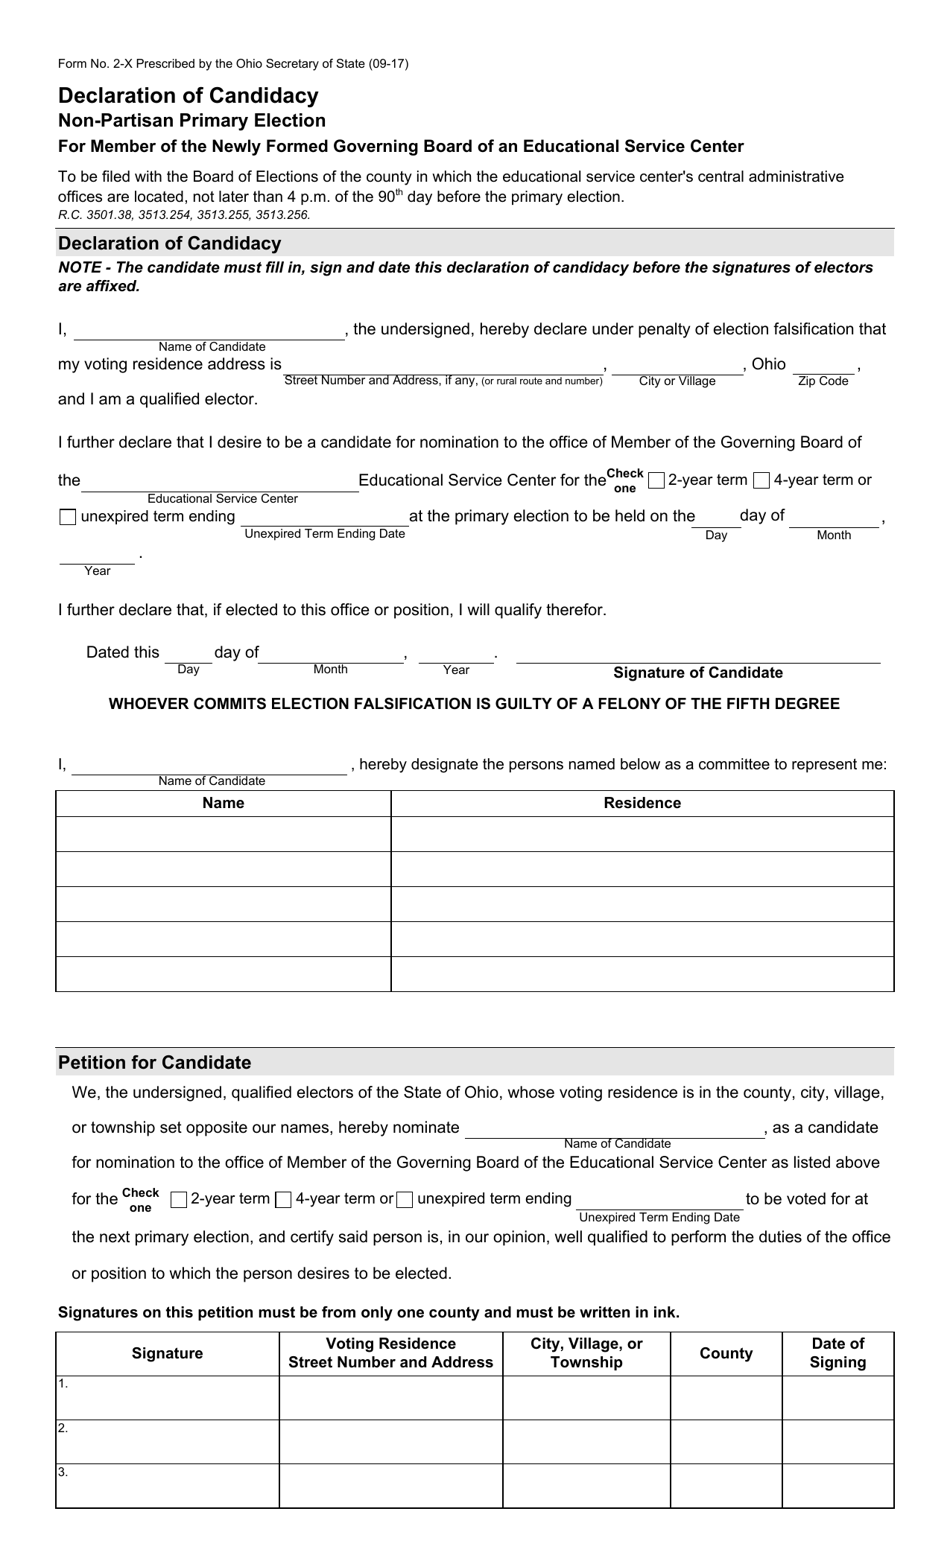 Form 2-X Declaration of Candidacy for Member of the Newly Formed Governing Board of an Educational Service Center - Non-partisan Primary Election - Ohio, Page 1